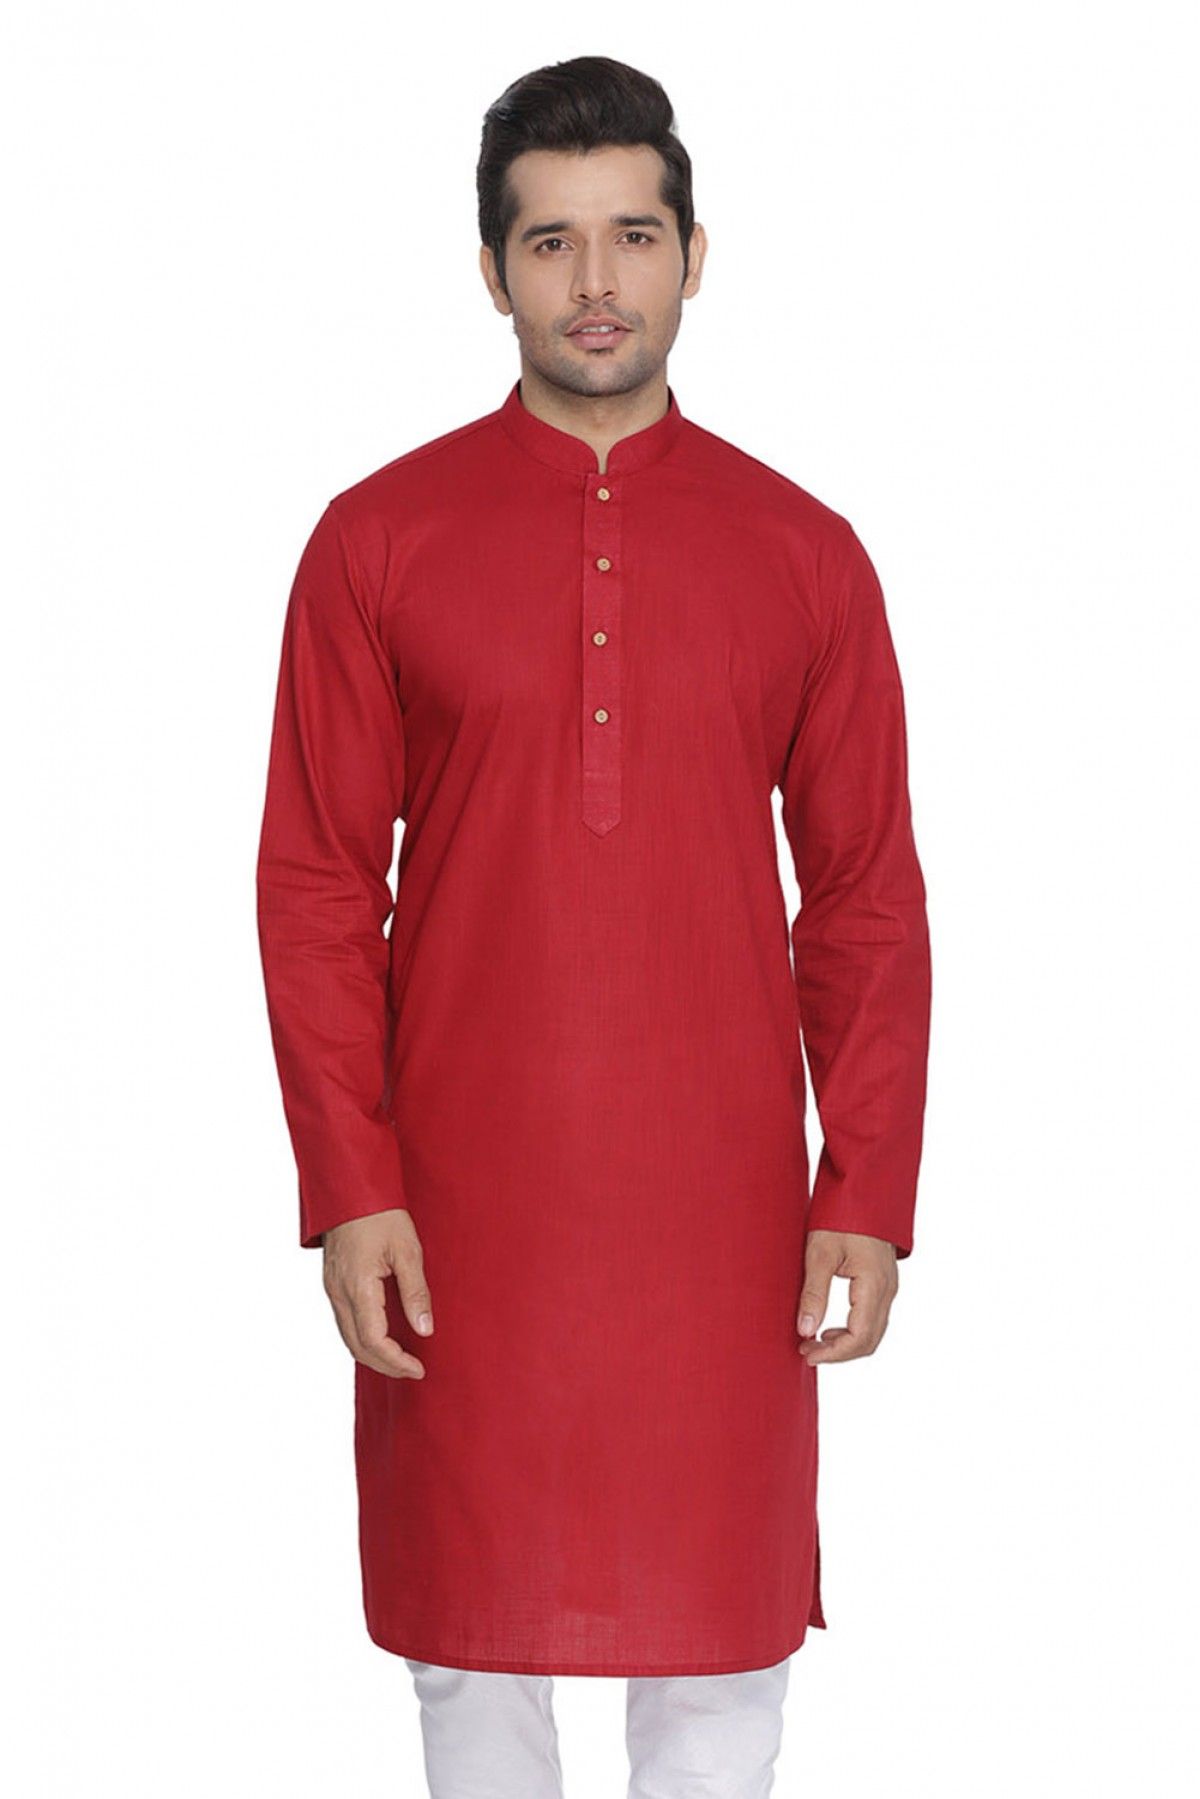 Cotton Party Wear Only Kurta In Maroon Colour